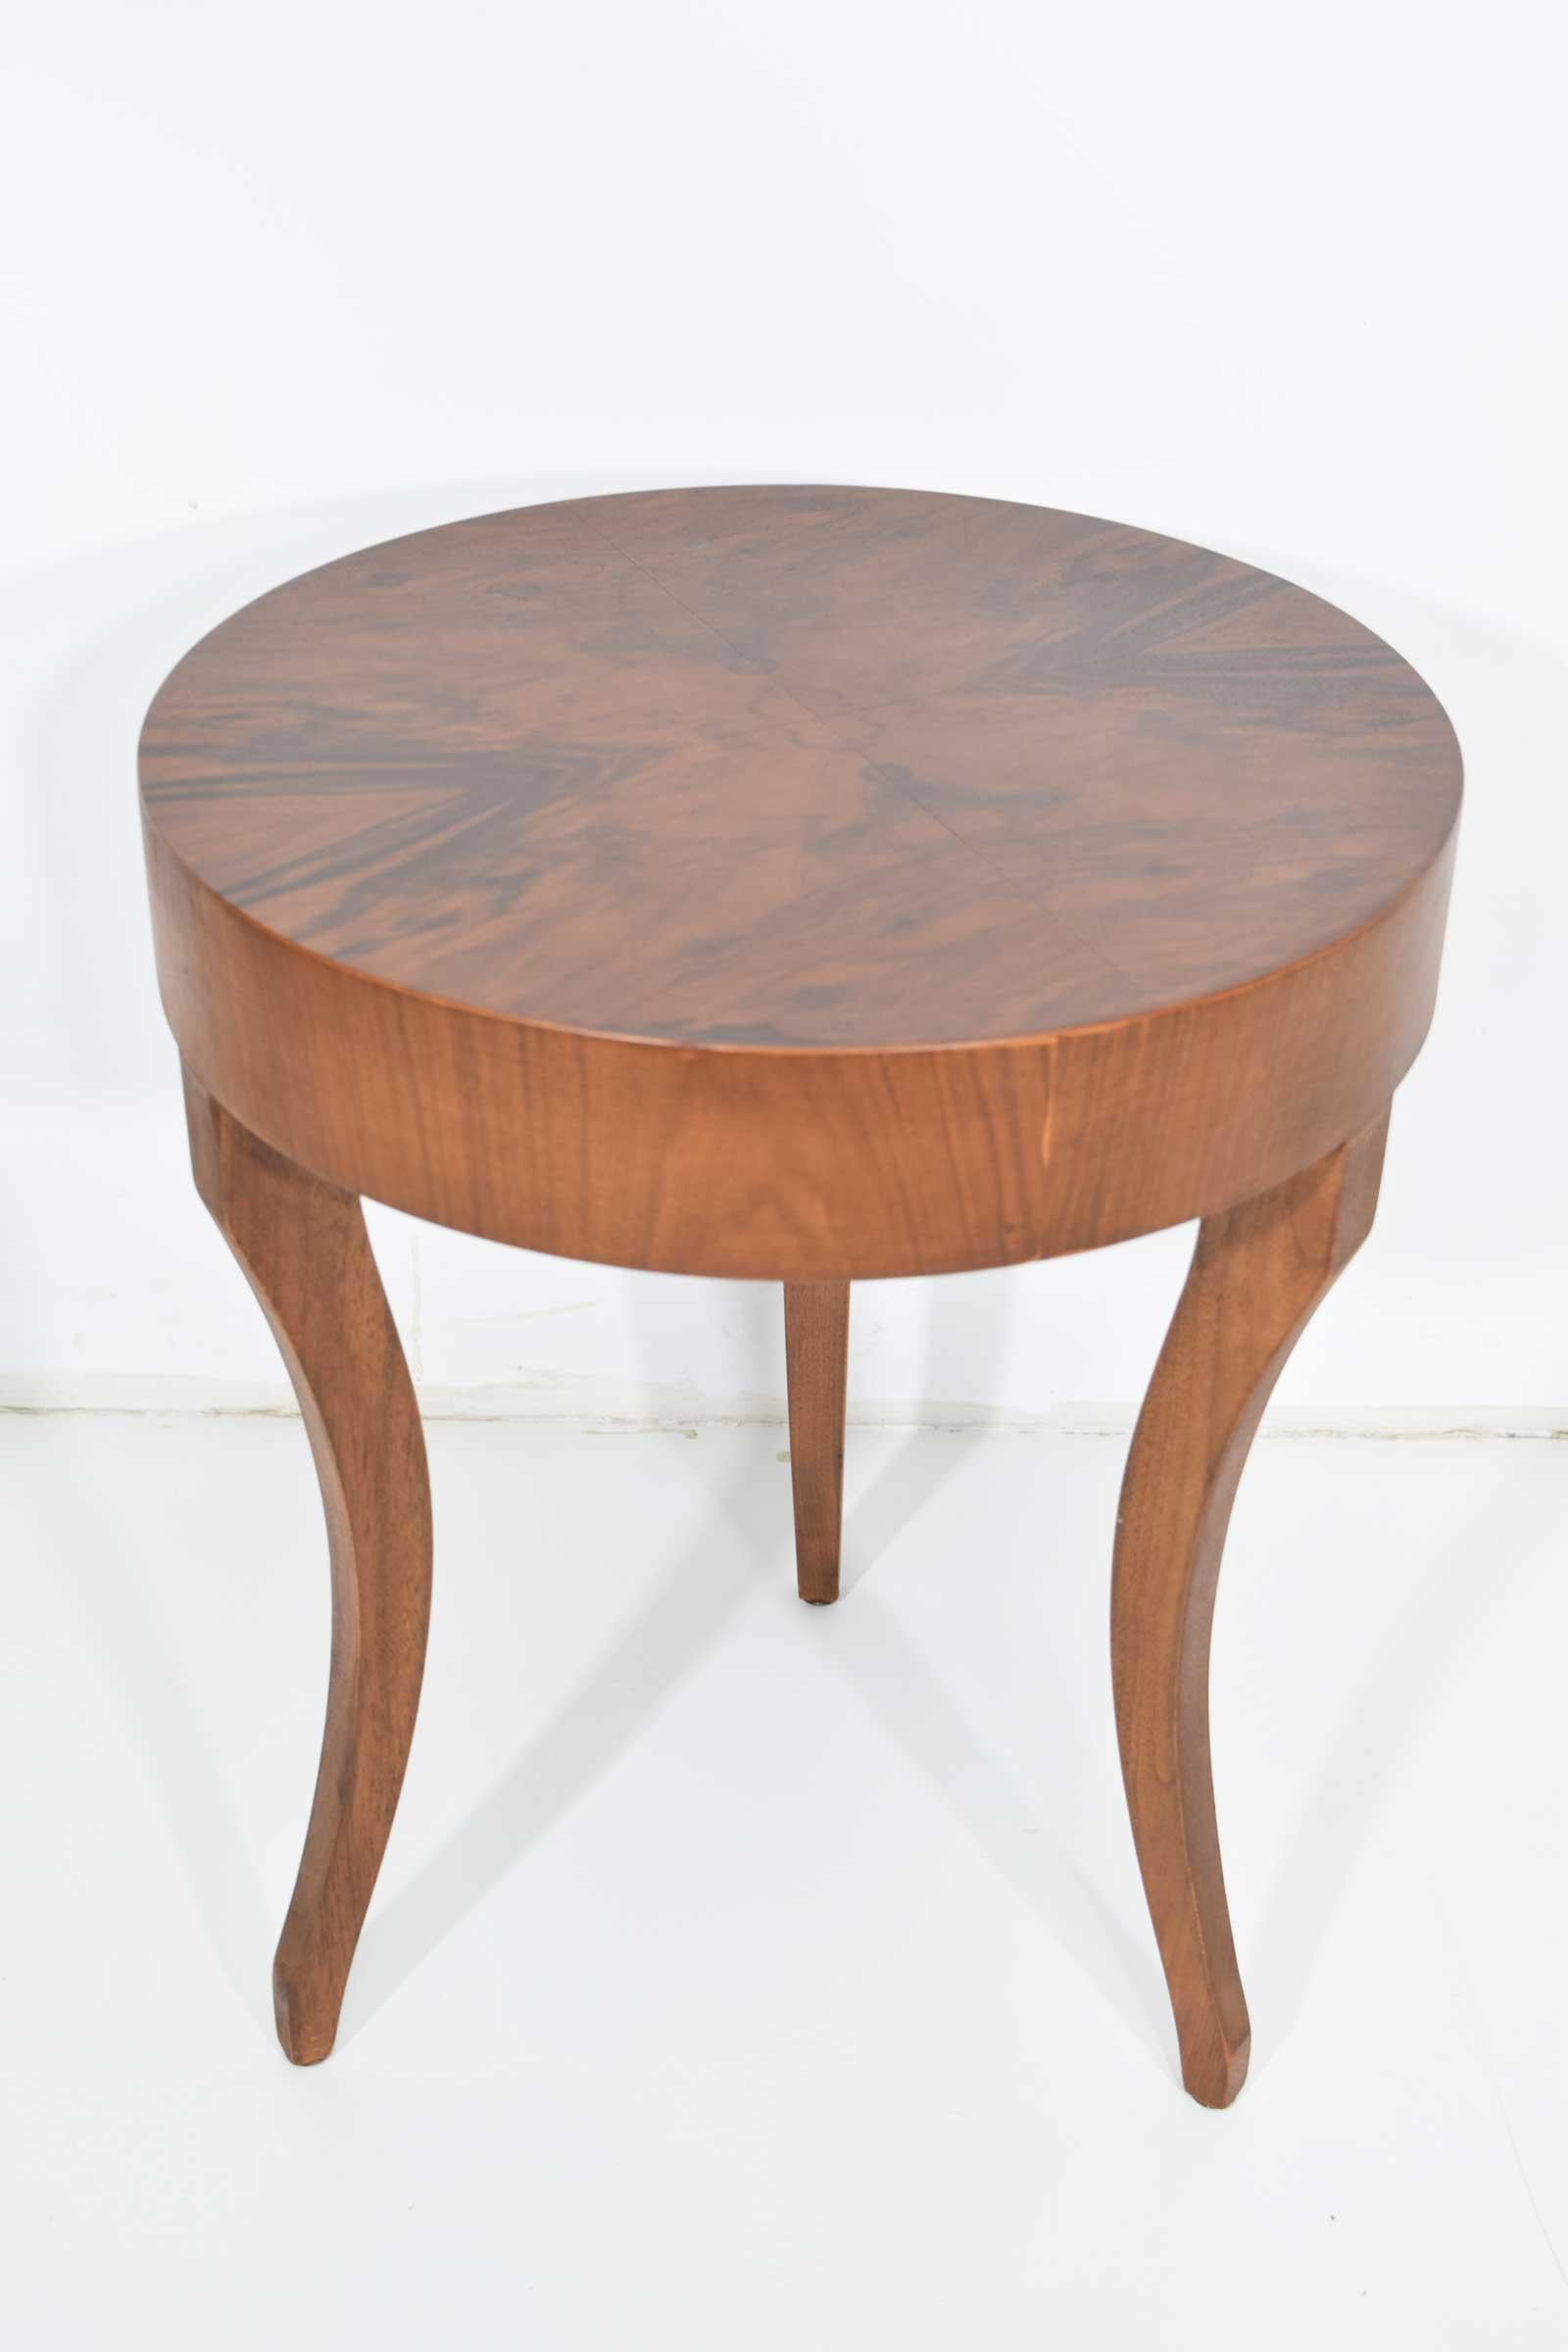 Modern Baker Side Table with Three Legs